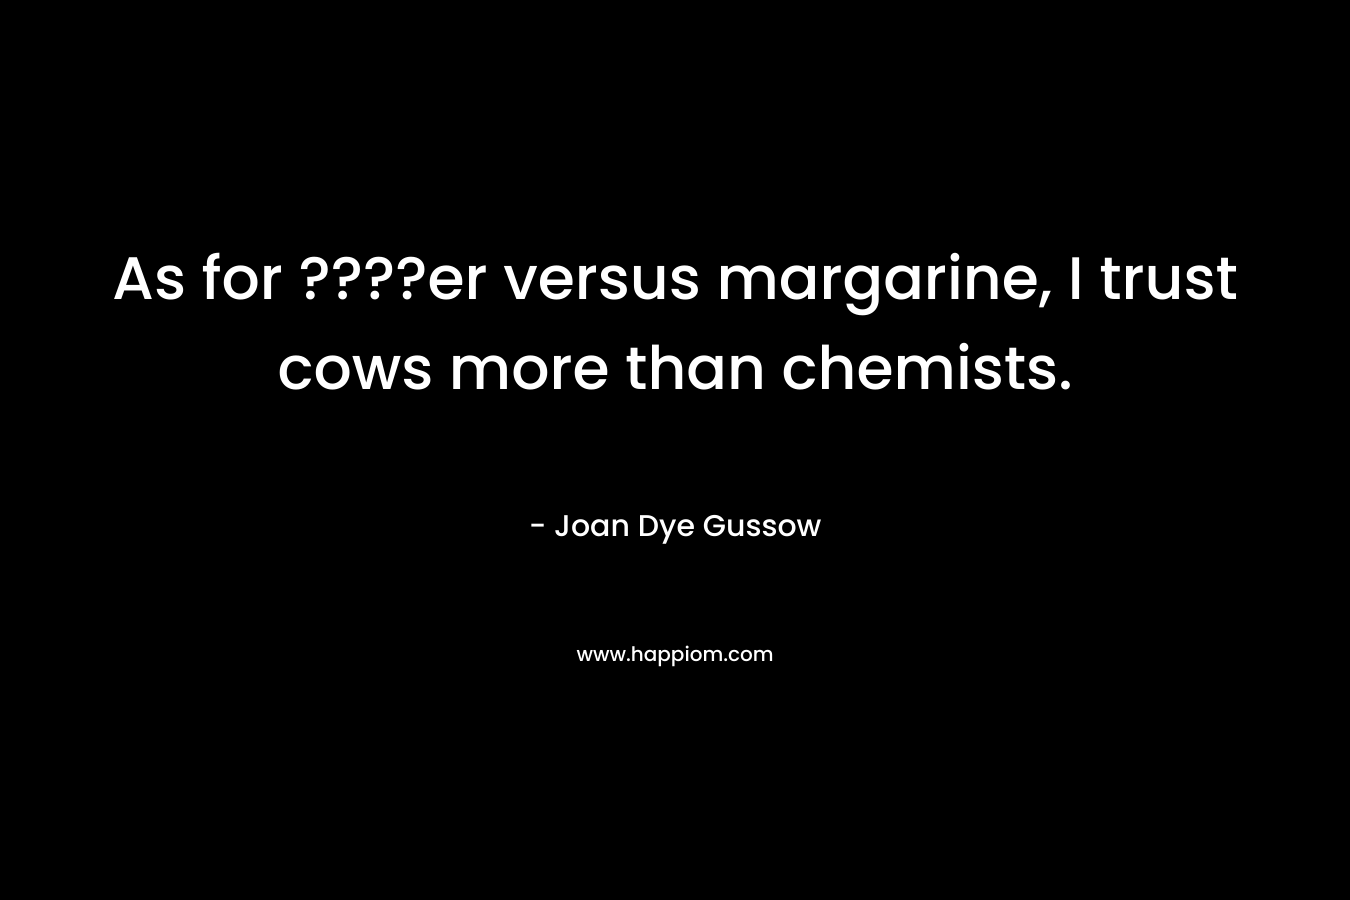 As for ????er versus margarine, I trust cows more than chemists. – Joan Dye Gussow